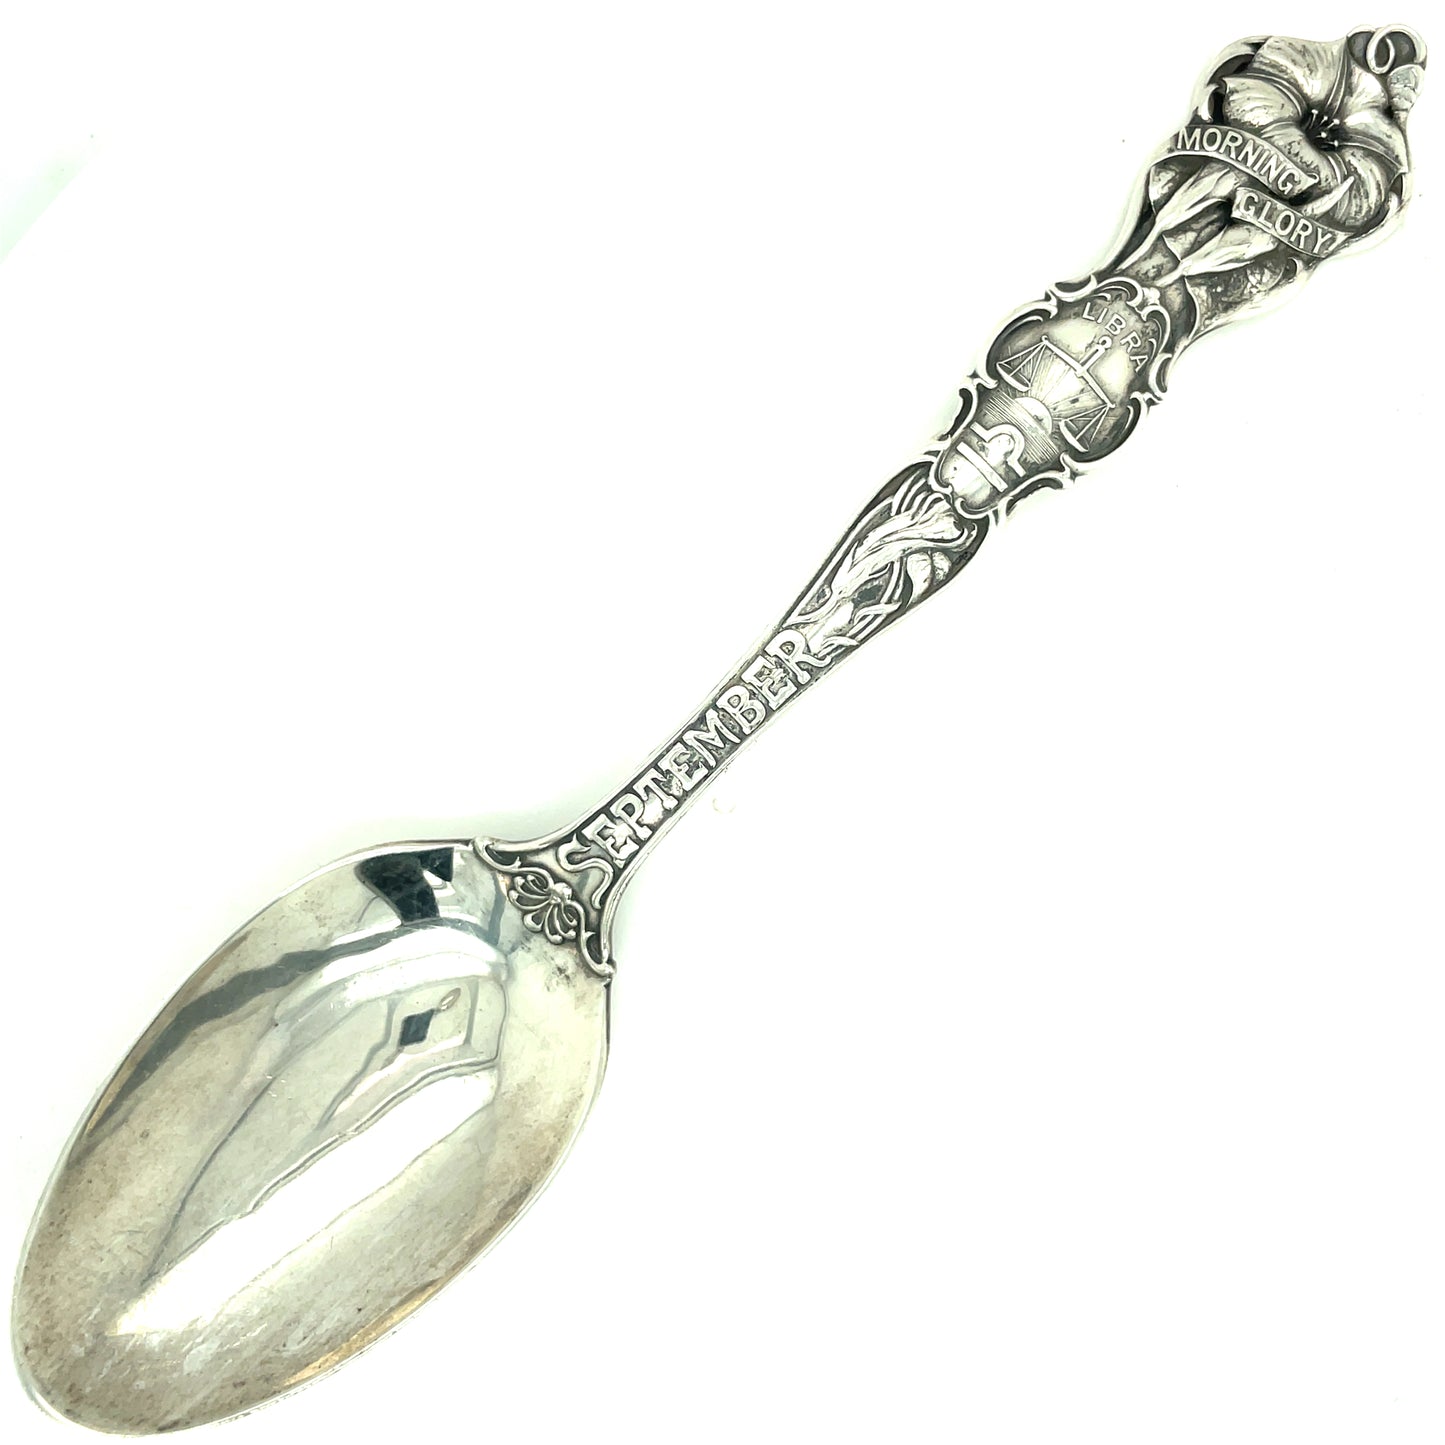 Vintage R. Wallace & Sons September Libra Morning Glory Sterling Silver Spoon No Mono